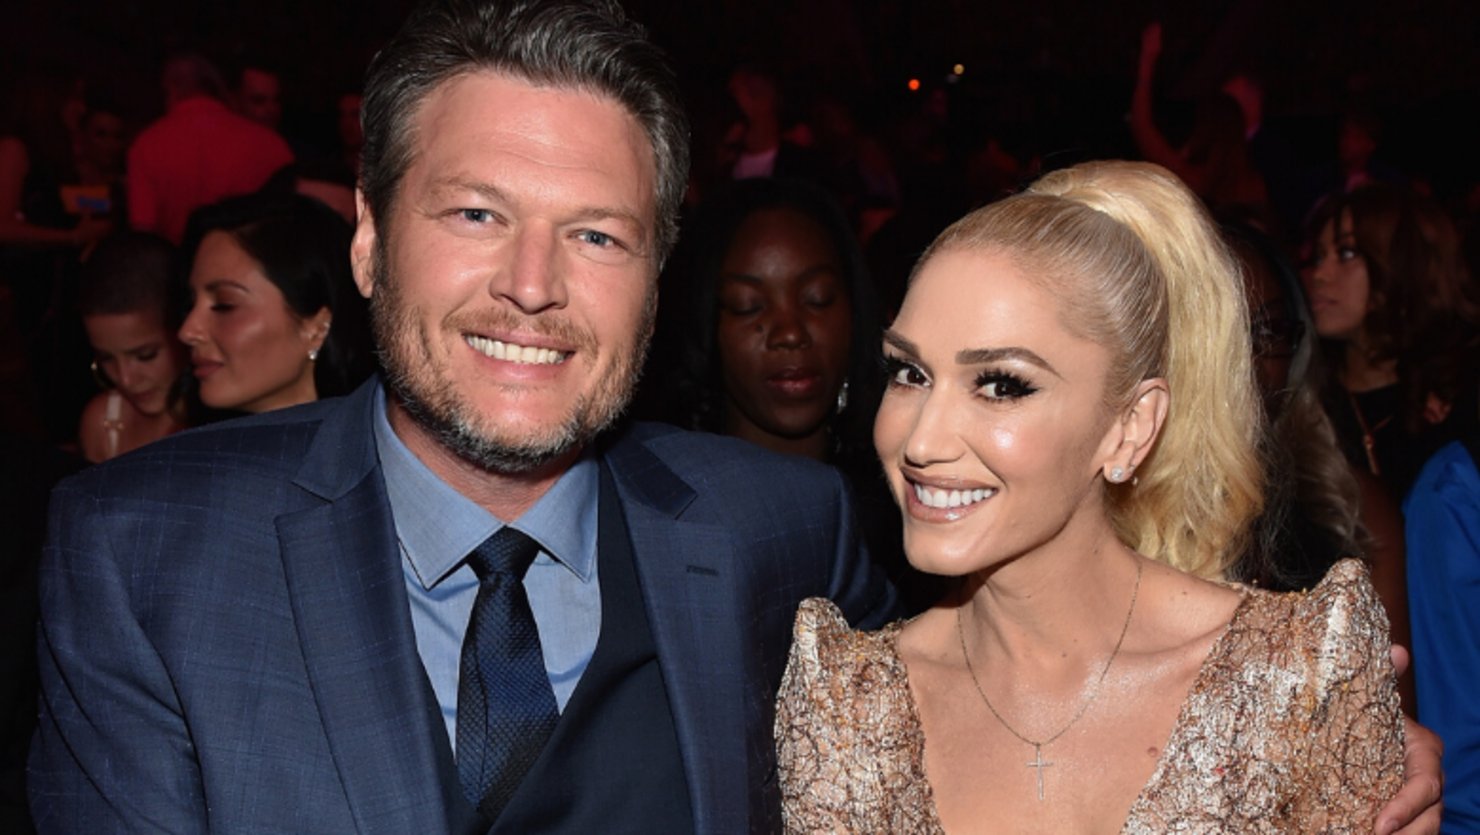 Blake Shelton Says His Relationship With Gwen Stefani Is A 'Head Scratcher'